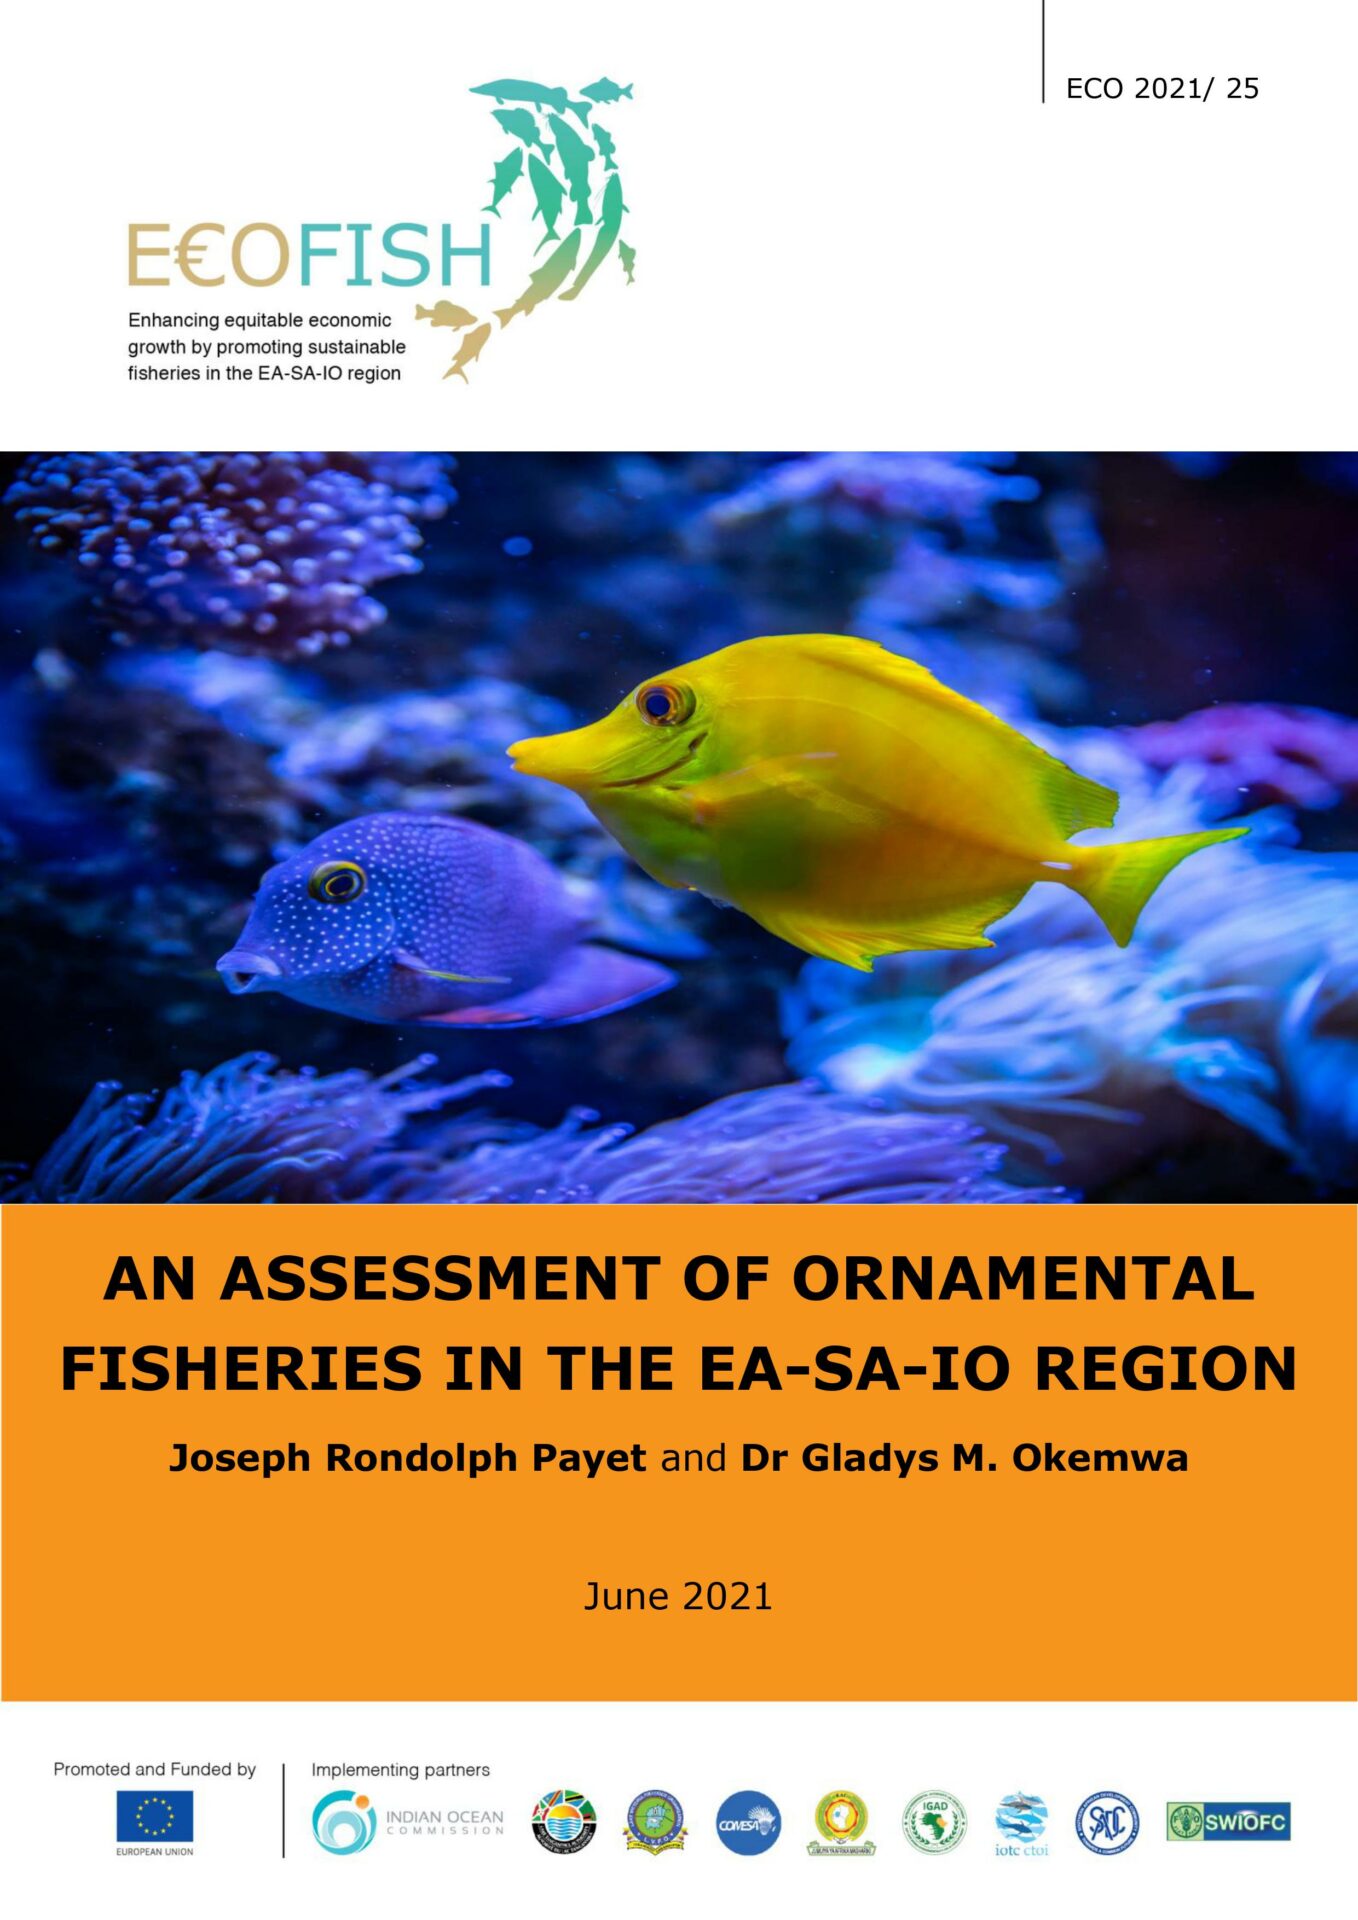 AN ASSESSMENT OF ORNAMENTAL FISHERIES IN THE EA-SA-IO REGION